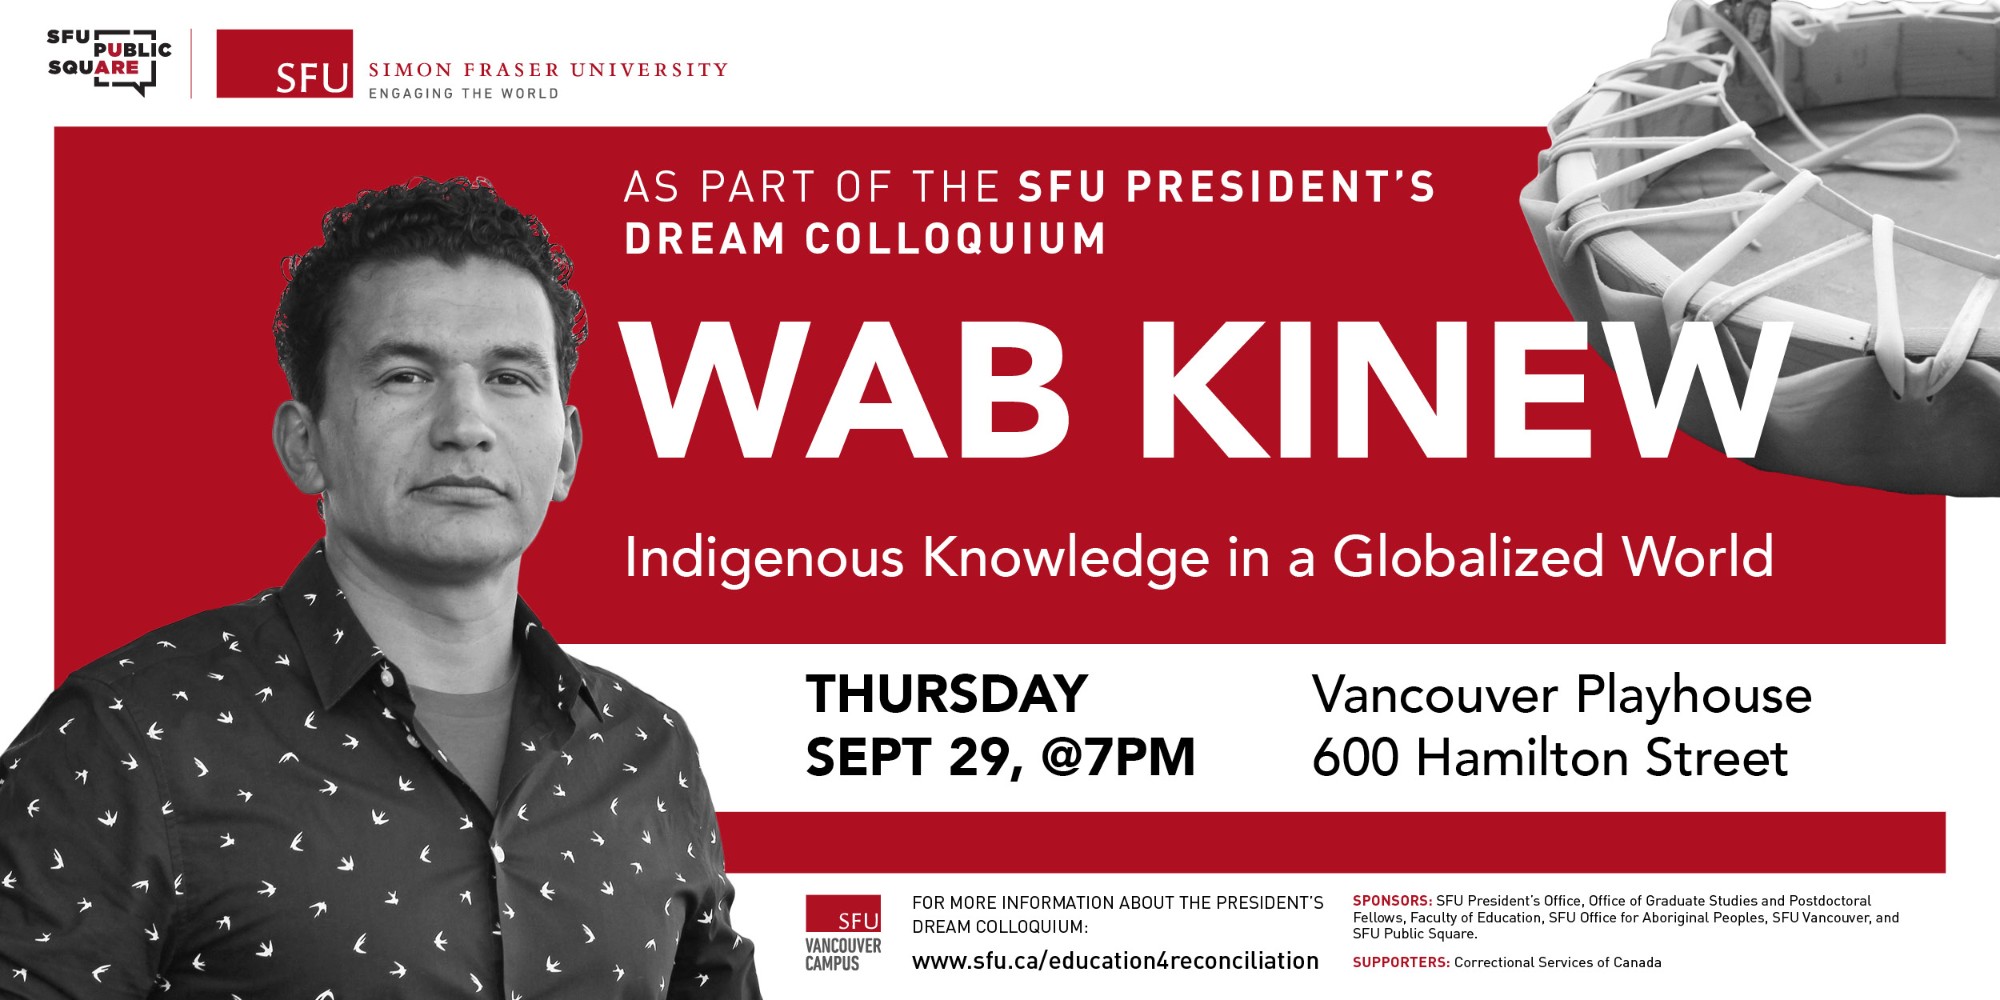 Wab Kinew: Indigenous Knowledge in a Globalized World